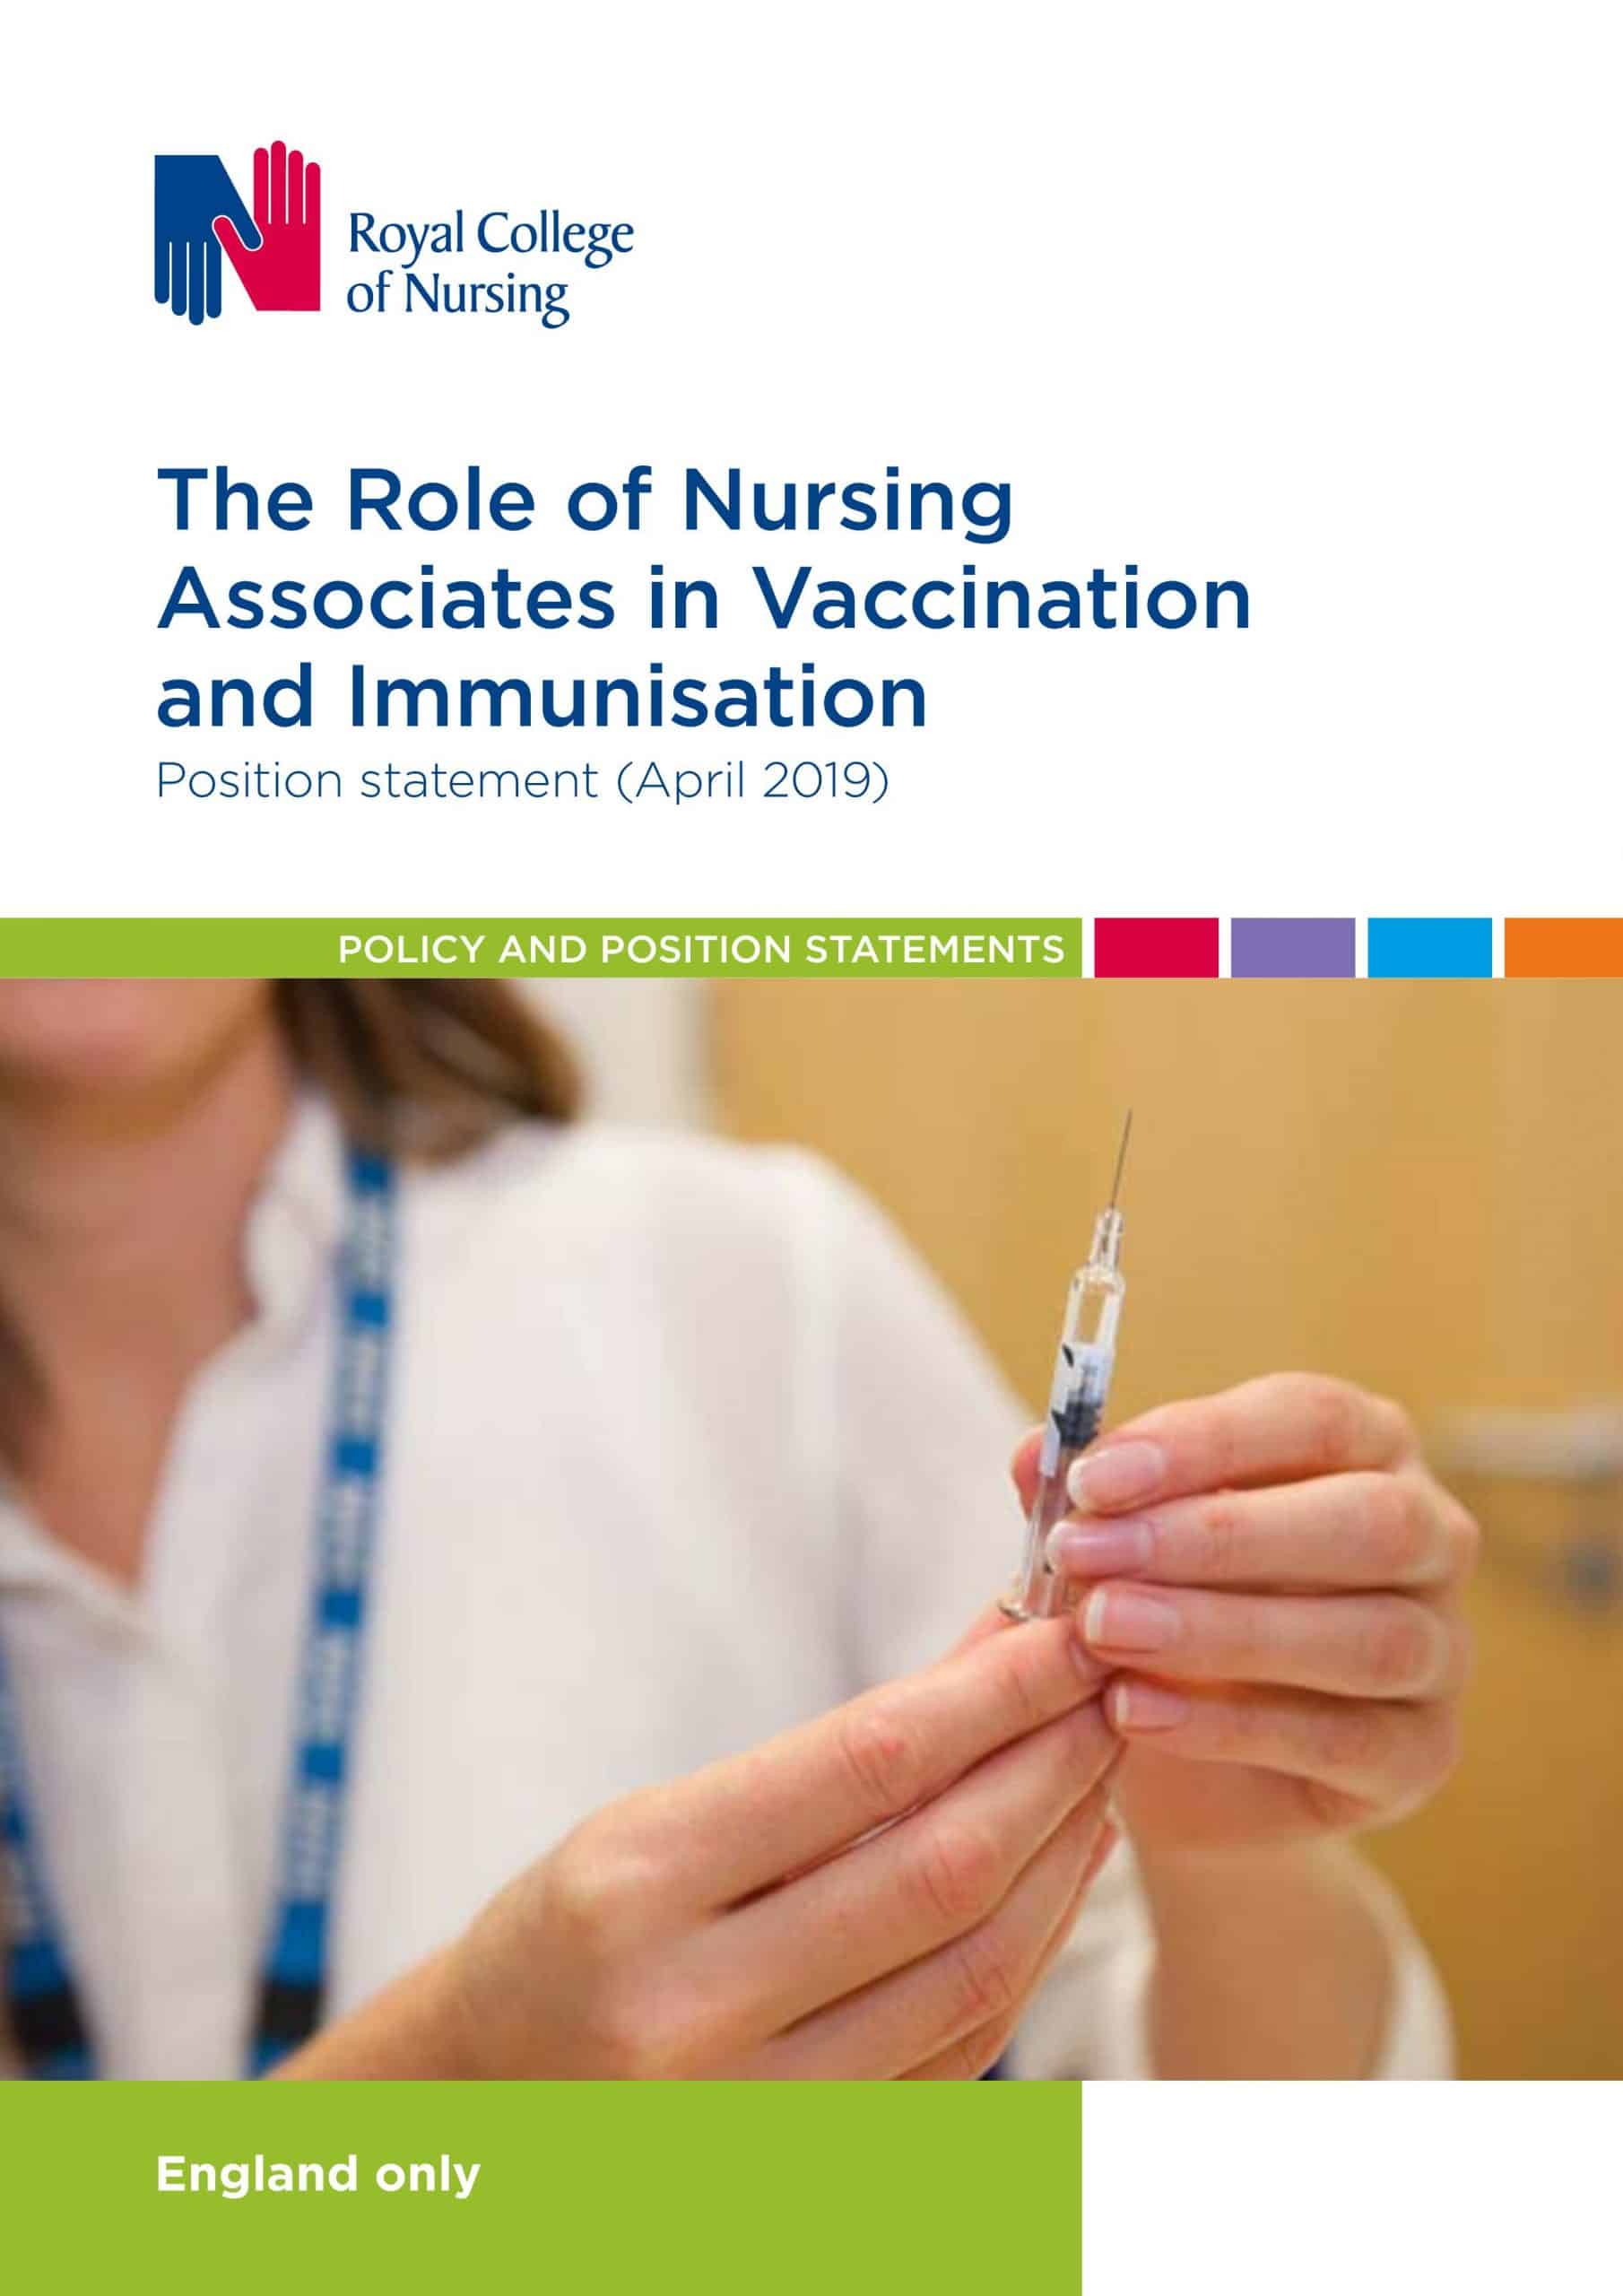 The Role of Nursing Associates in Vaccination and Immunisation (RCN, 2019) (1)-0